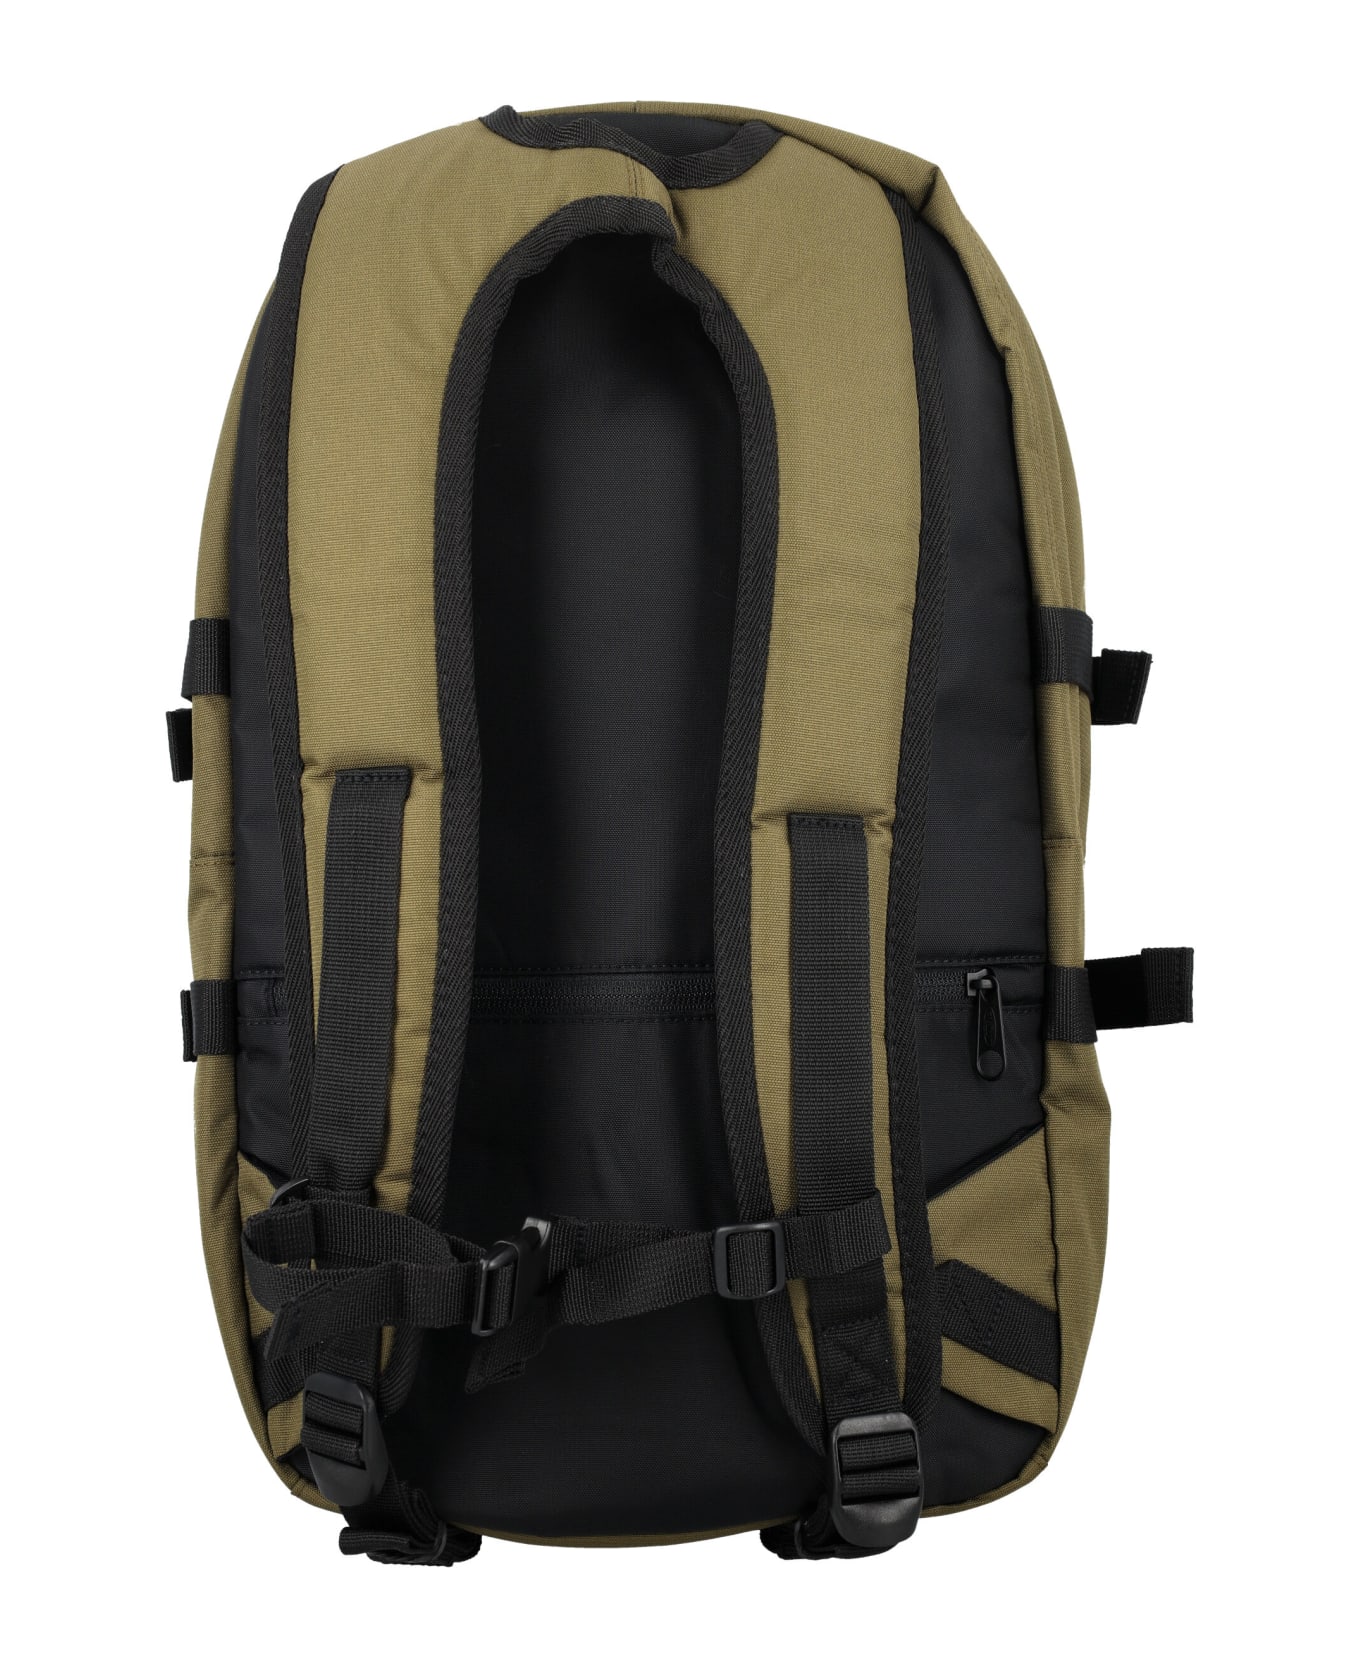 Eastpak Floid Tact Backpack - ARMY